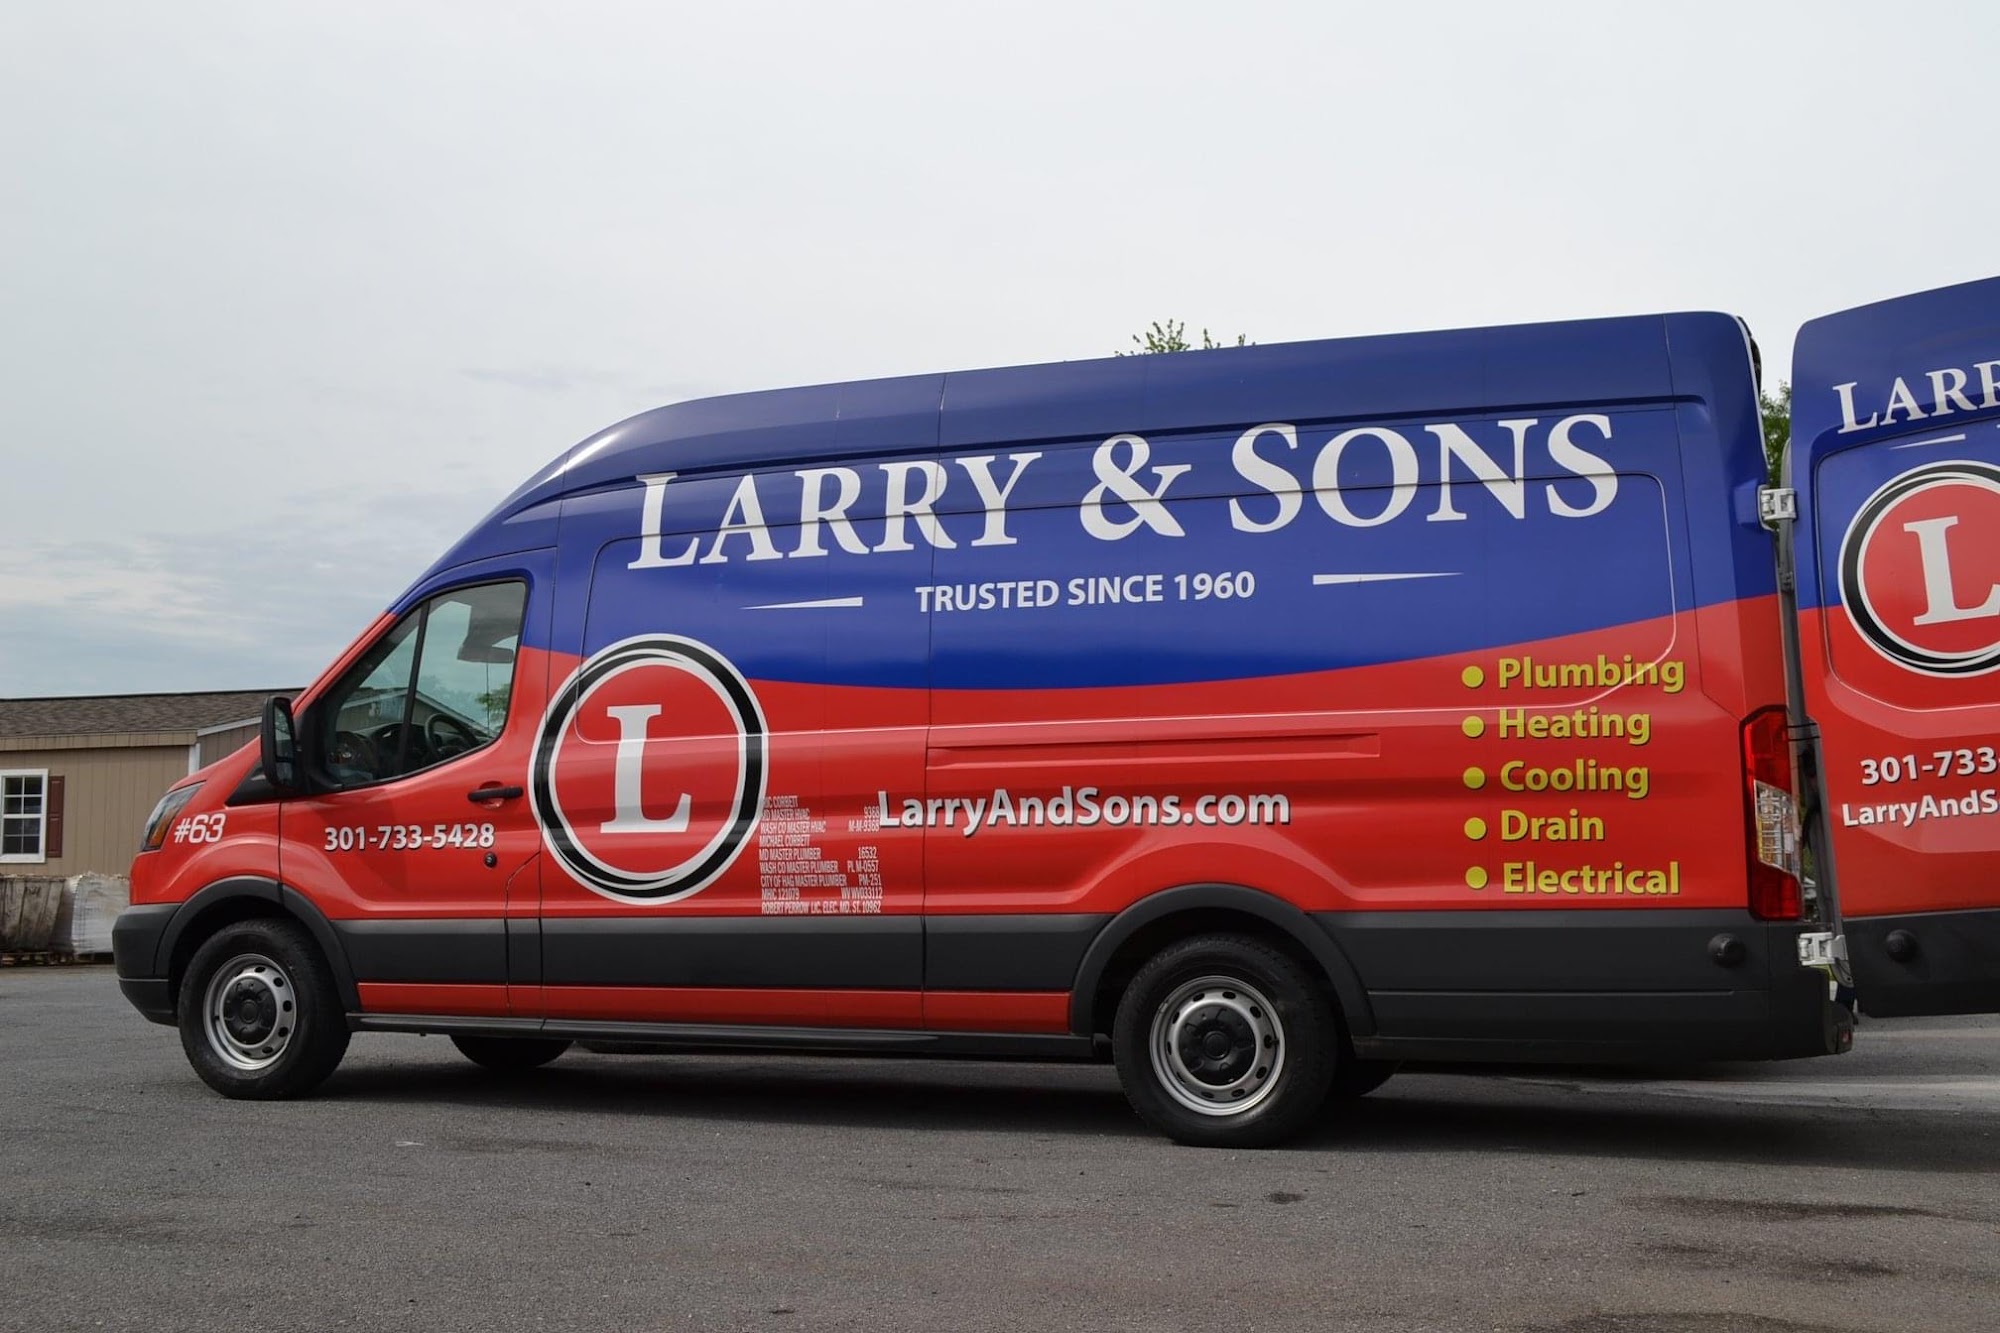 Larry & Sons Plumbing, Heating, Cooling, Drain & Electrical